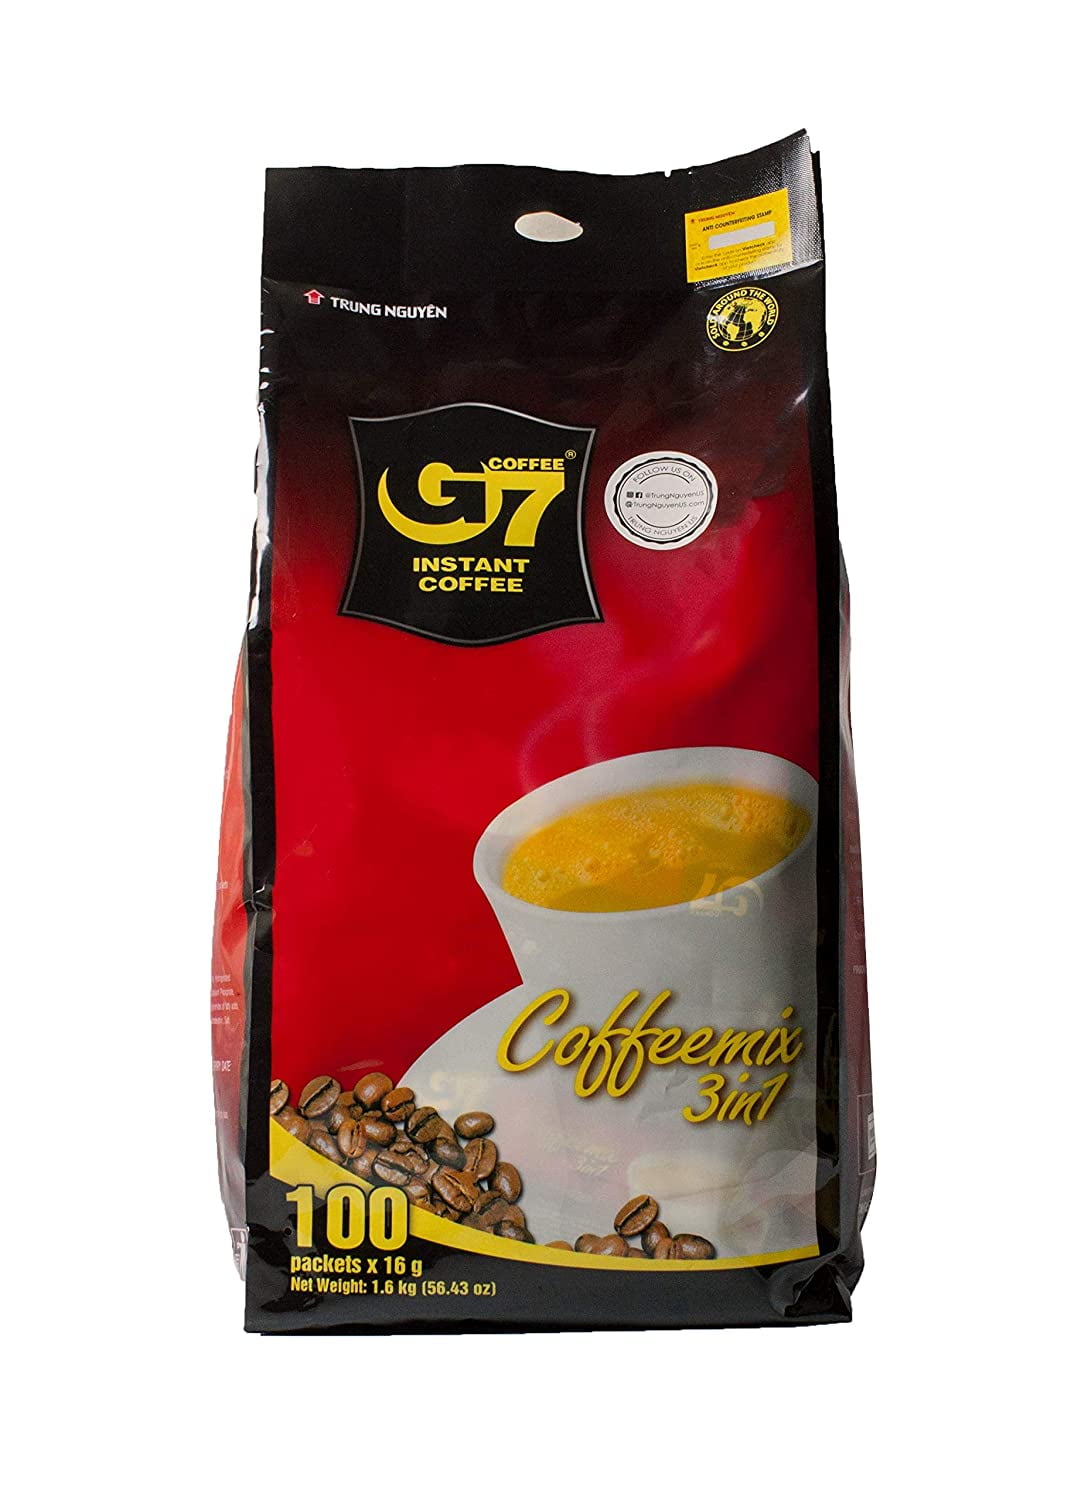 Trung Nguyen - G7 3 In 1 Instant Coffee - 1 Pack 100 Sachets | Roasted  Ground Coffee Blend with Creamer and Sugar, Suitable for Most Coffee  Brewing 